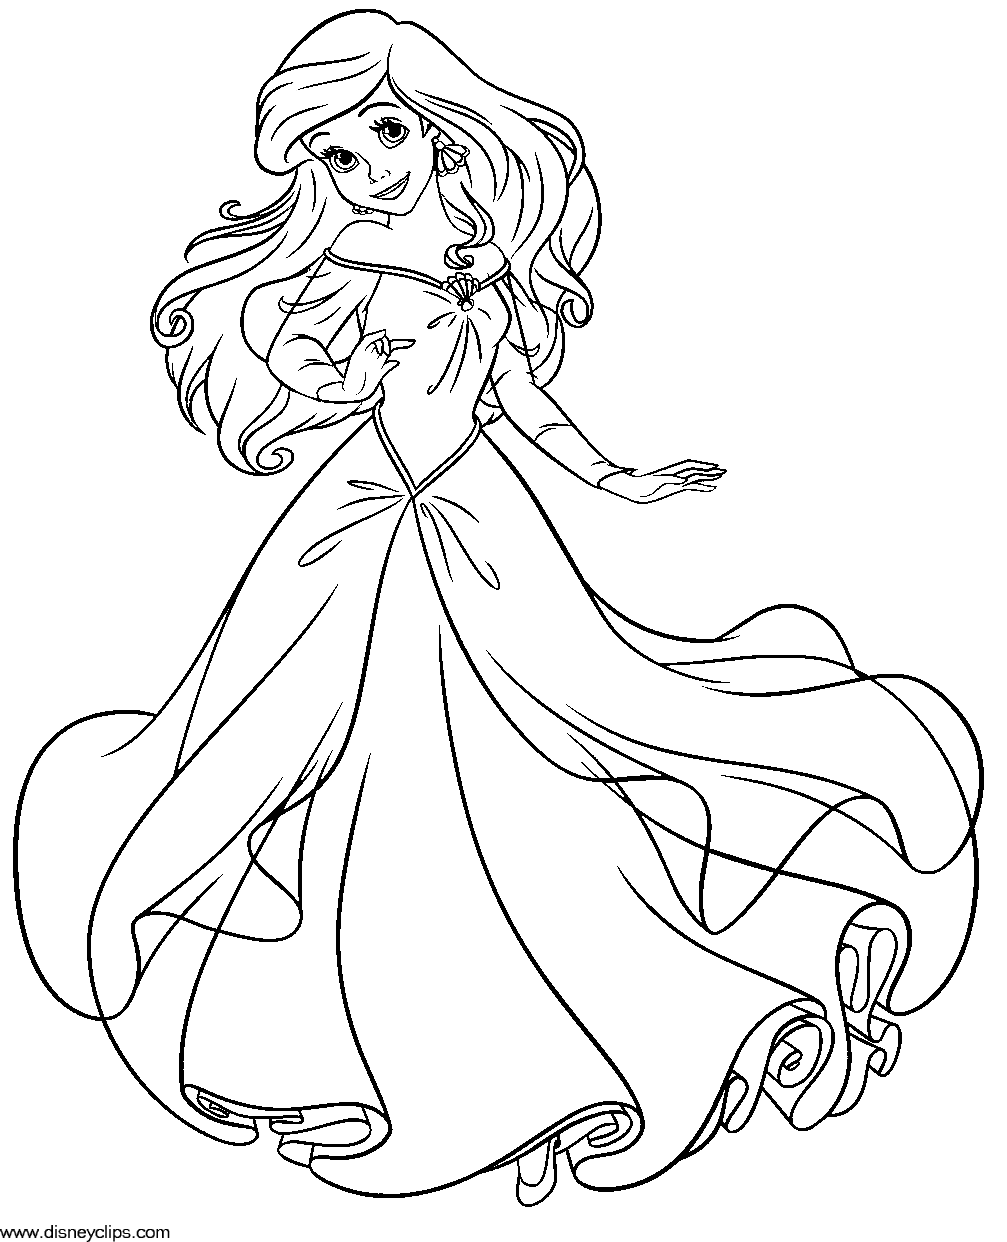 ariel coloring page ariel coloring pages to download and print for free ariel coloring page 